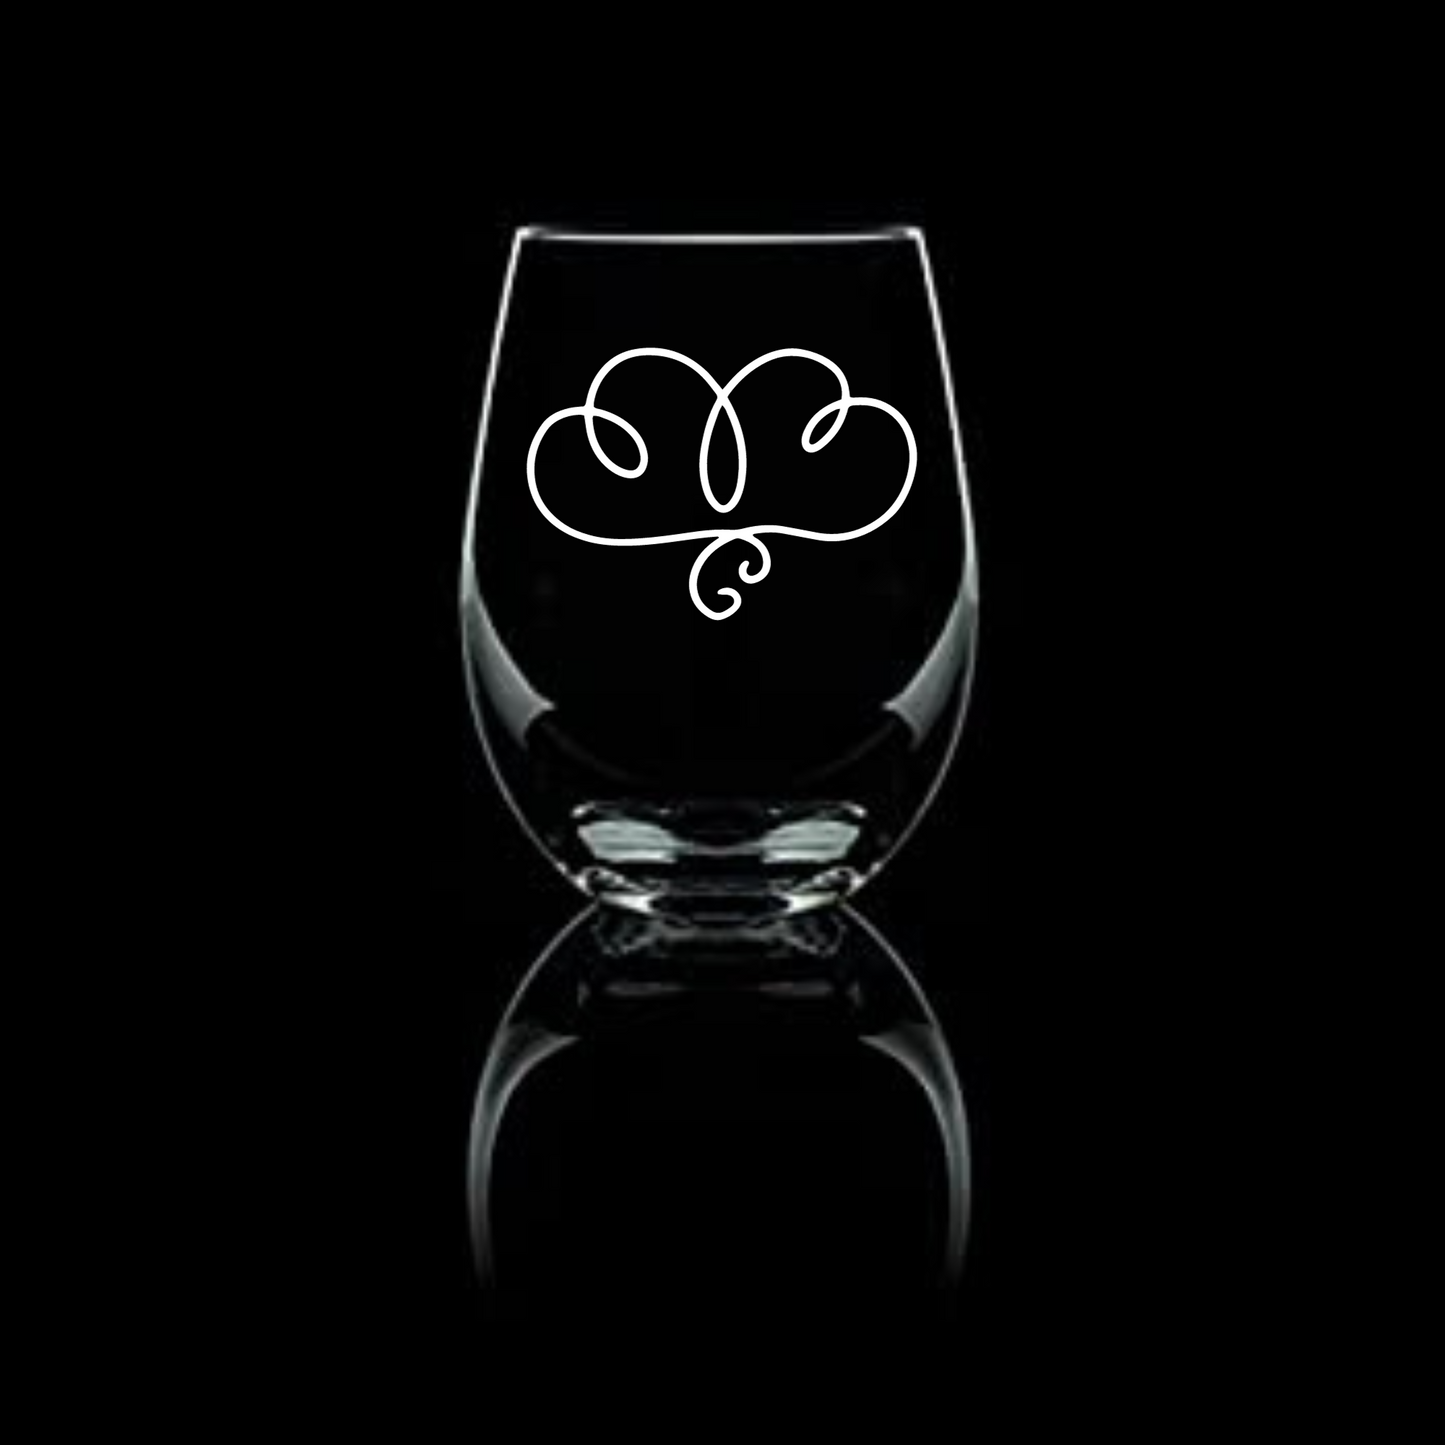 Two Hearts Intertwined Sandblasted Etched Wine Glass. Hand-carved into the 20.5oz glass - Expressive DeZien 